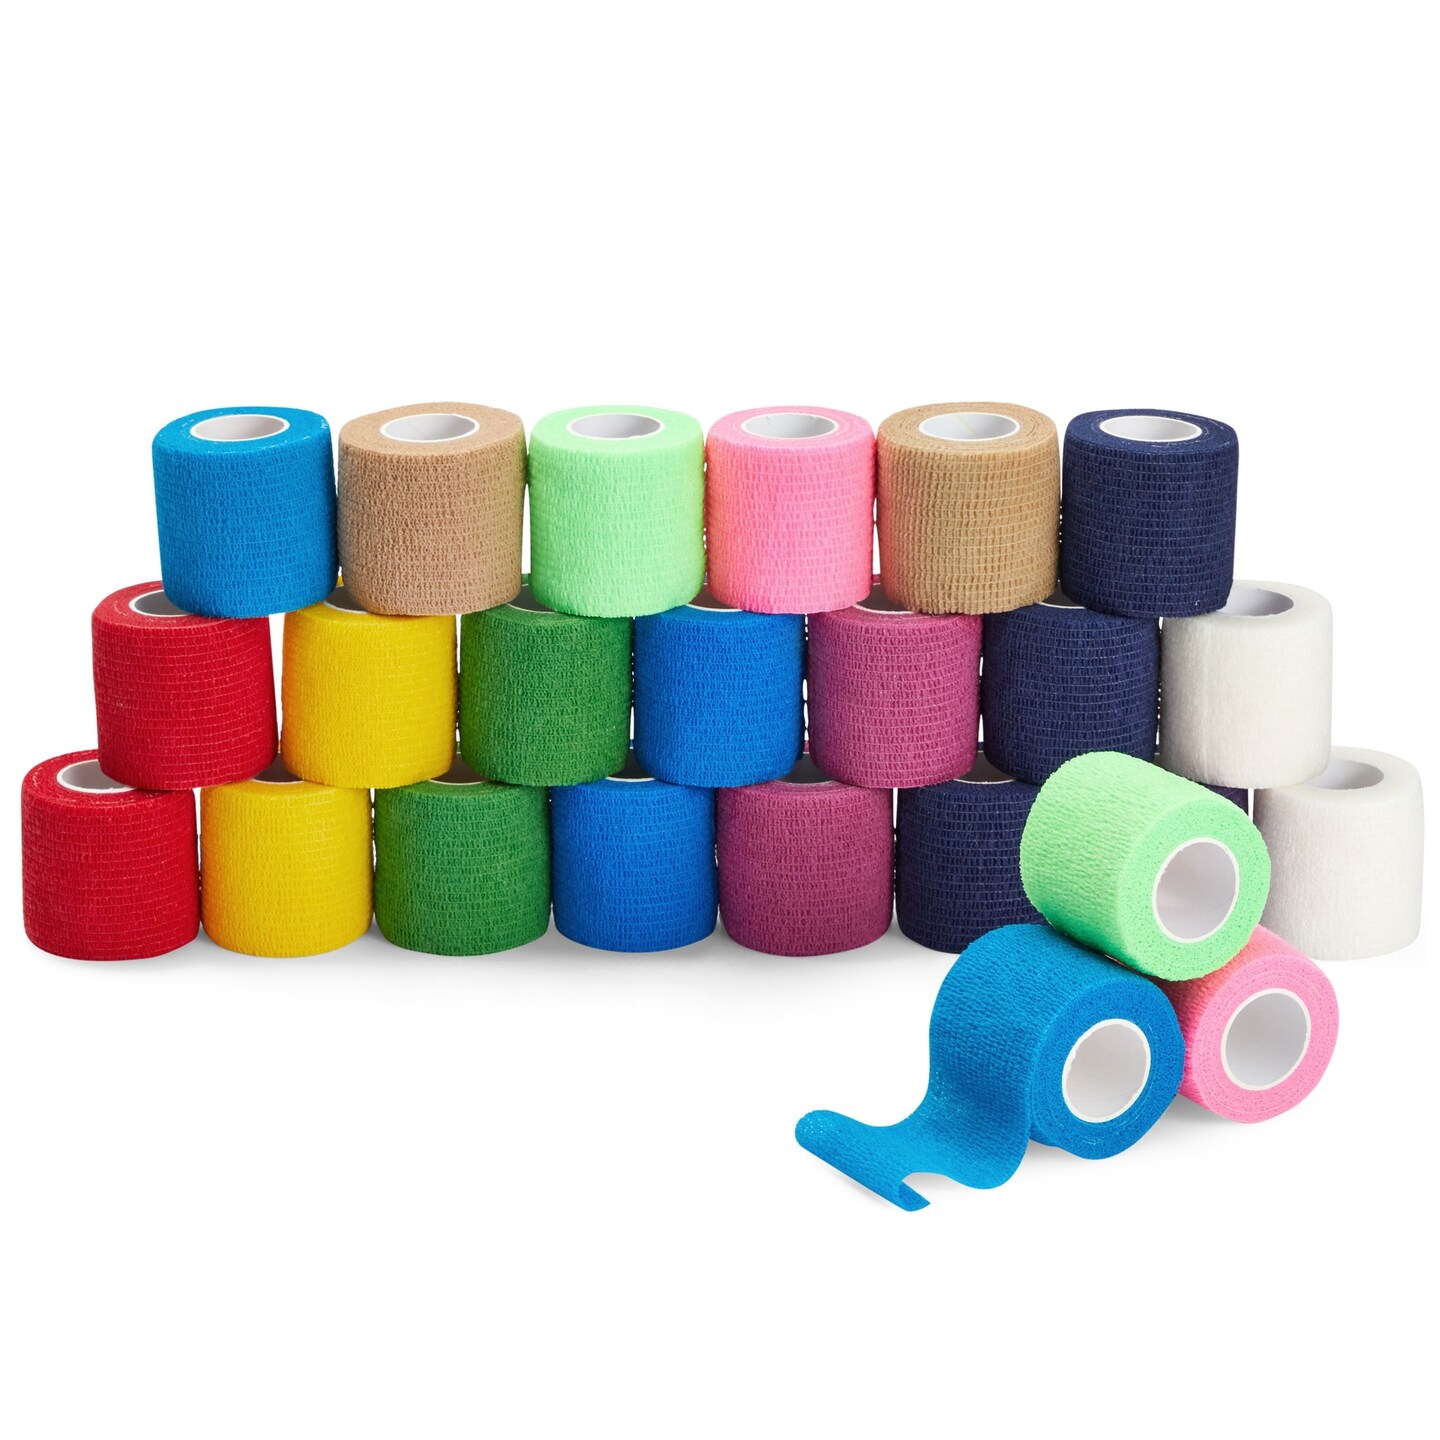 24-Rolls Self Adhesive Bandage Wrap 2 inch x 5 Yards &#x2013; Breathable Vet Tape, Elastic Cohesive for Wrist, Swelling, Sports, Tattoo (12 Bright Colors)